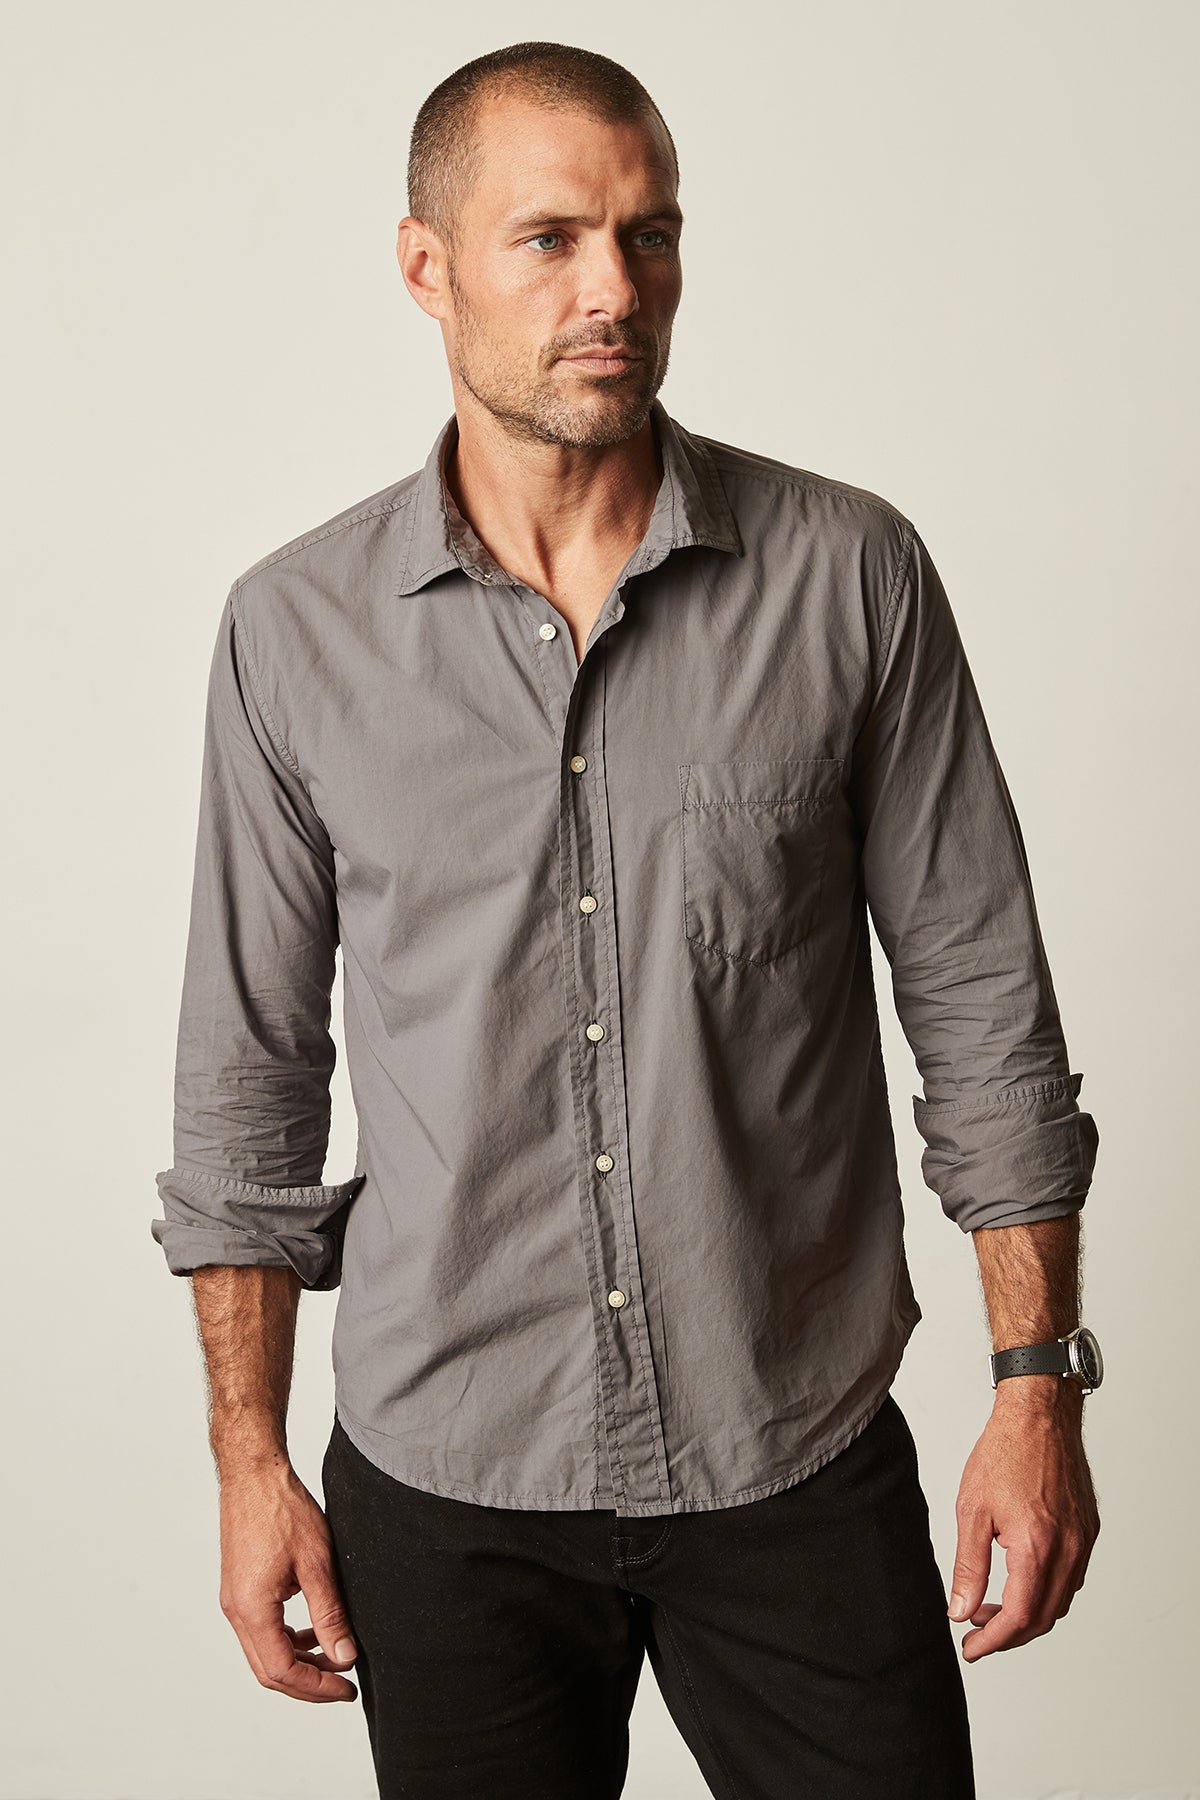 Brooks button up woven shirt in carbon front-24983593189569